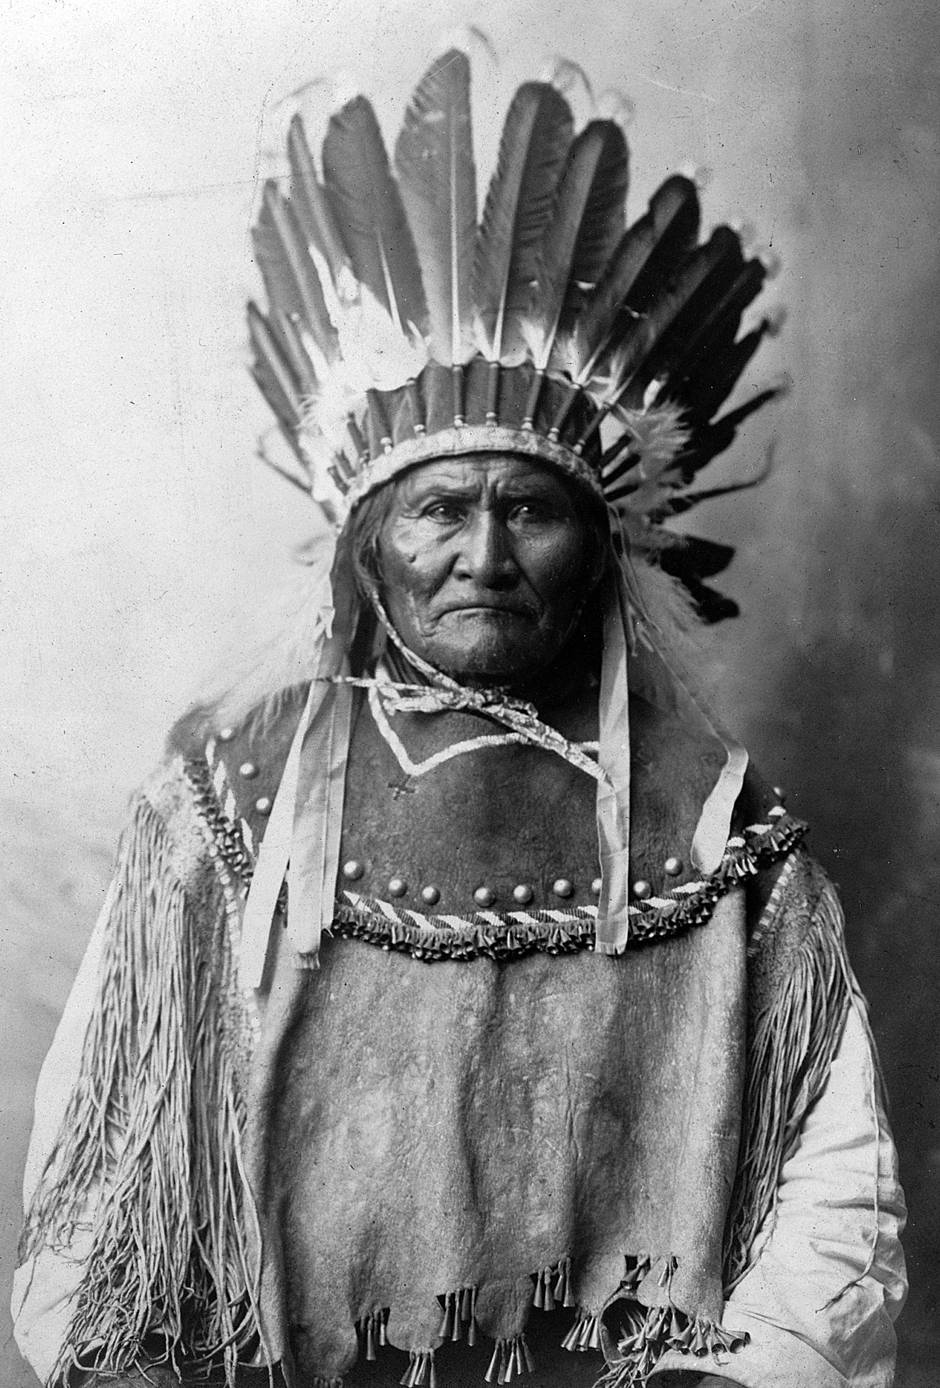 Archival images show Geronimo after his surrender in 1886 - The Globe and Mail